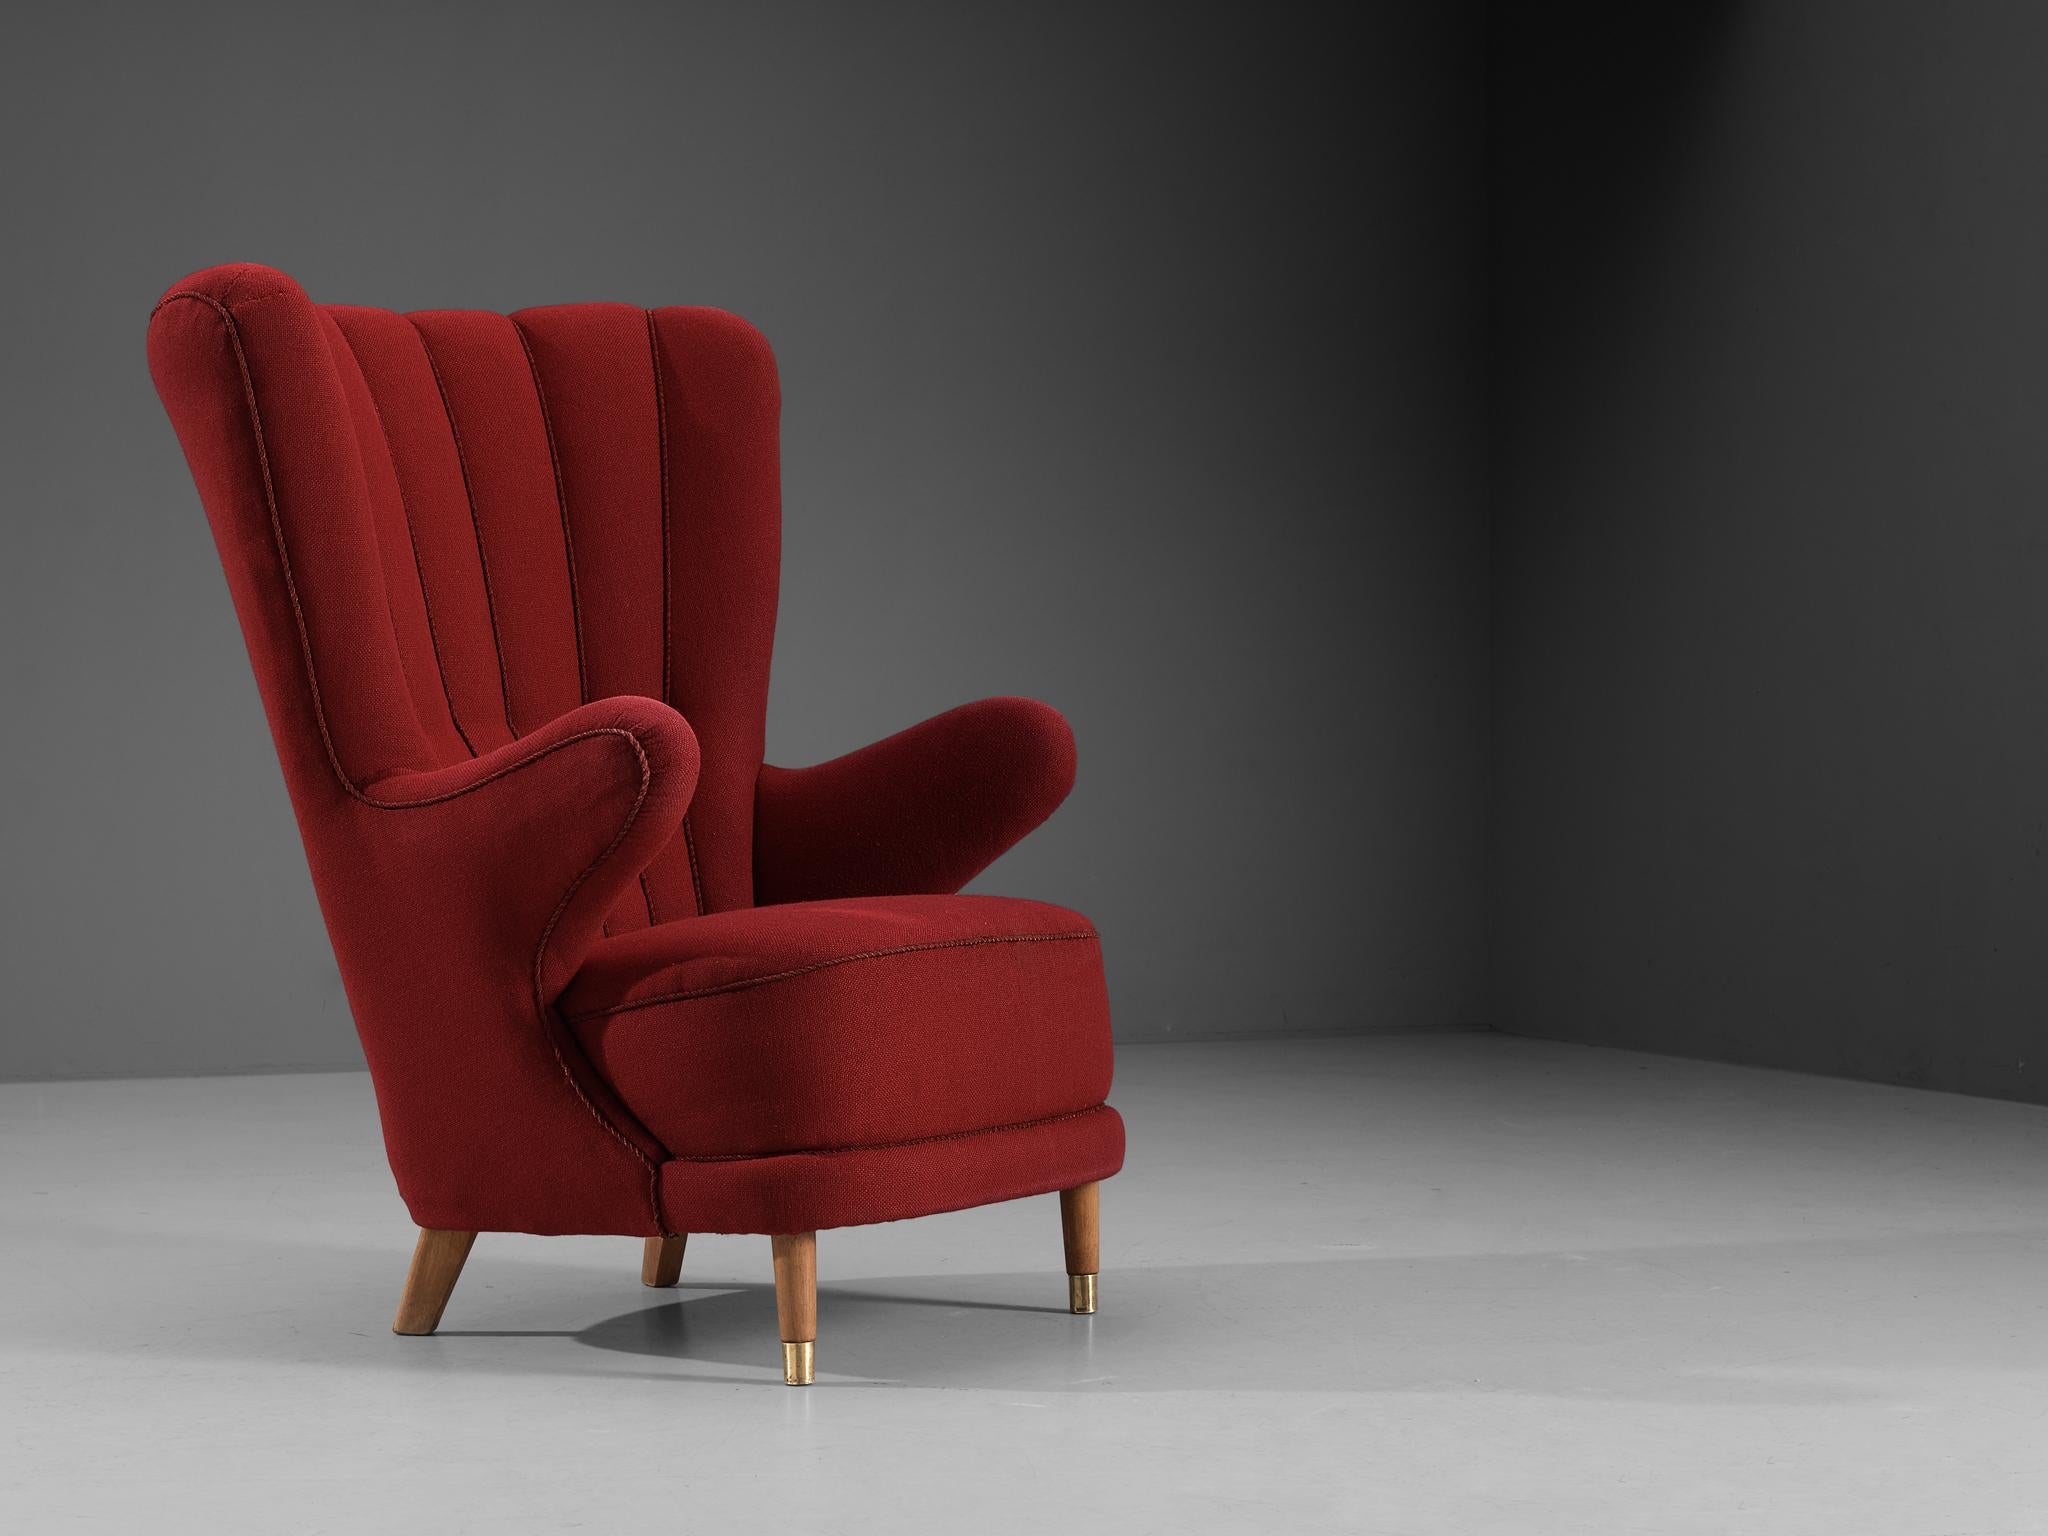 Schiller Polstermøbler, lounge chair, fabric, beech, brass, Denmark, circa. 1950 

This well-designed armchair was presented at the Manufacturers' Association's Furniture Fair in Fredericia in 1954. The design is based on a solid construction